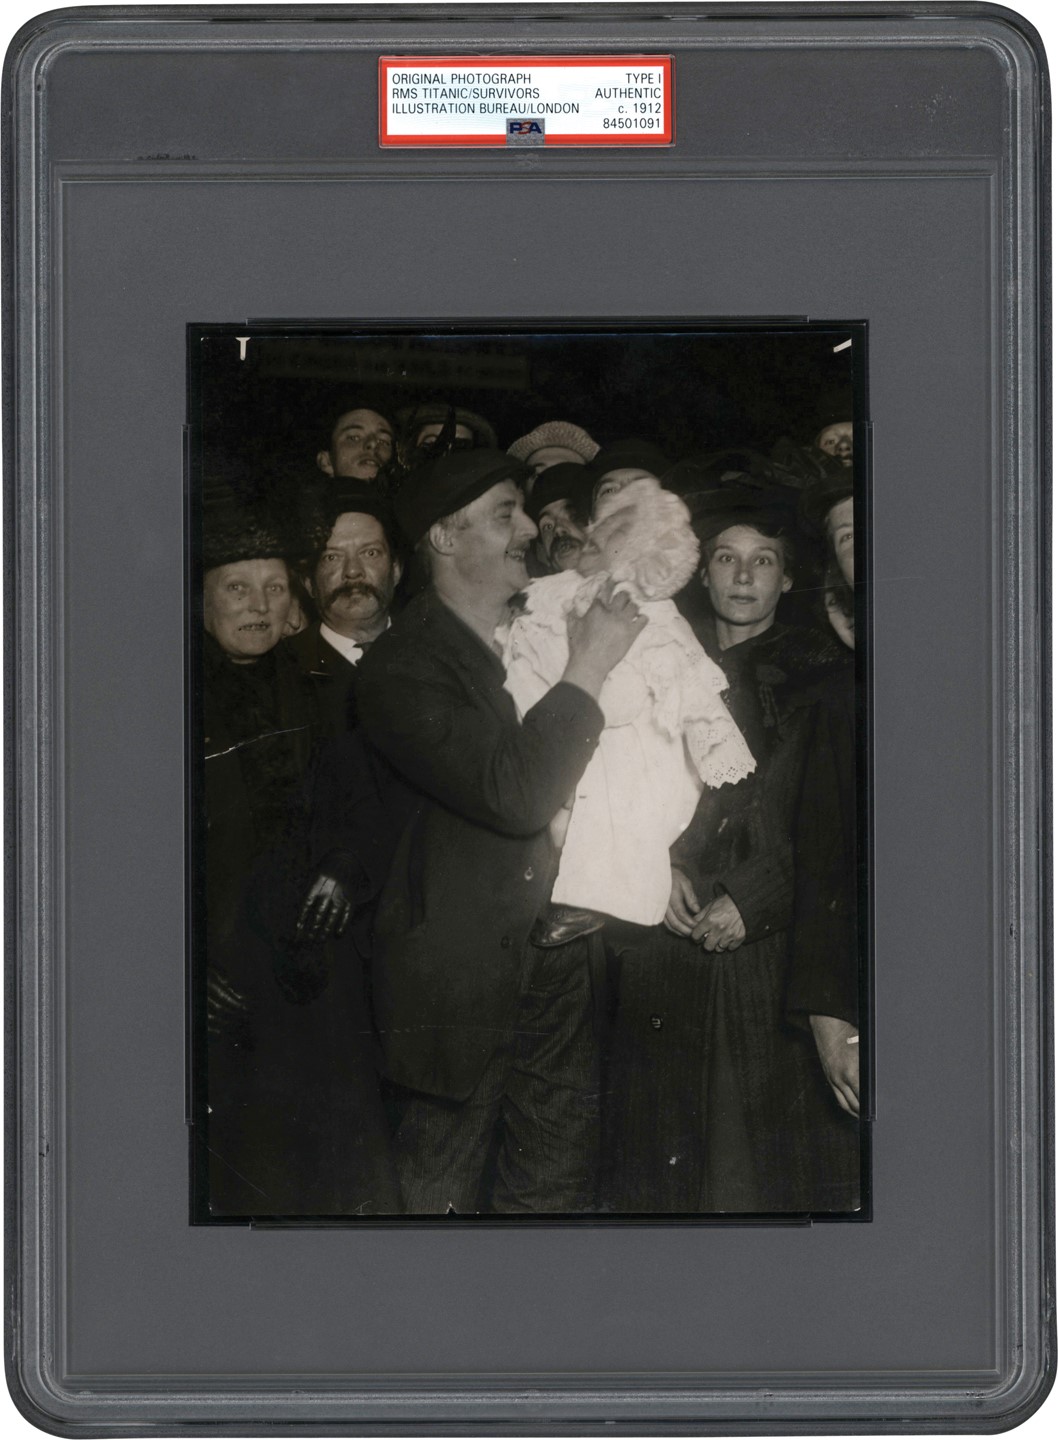 The Brown Brothers Collection - 1912 Crowd Awaiting the Titanic Survivors Photograph (PSA Type I)